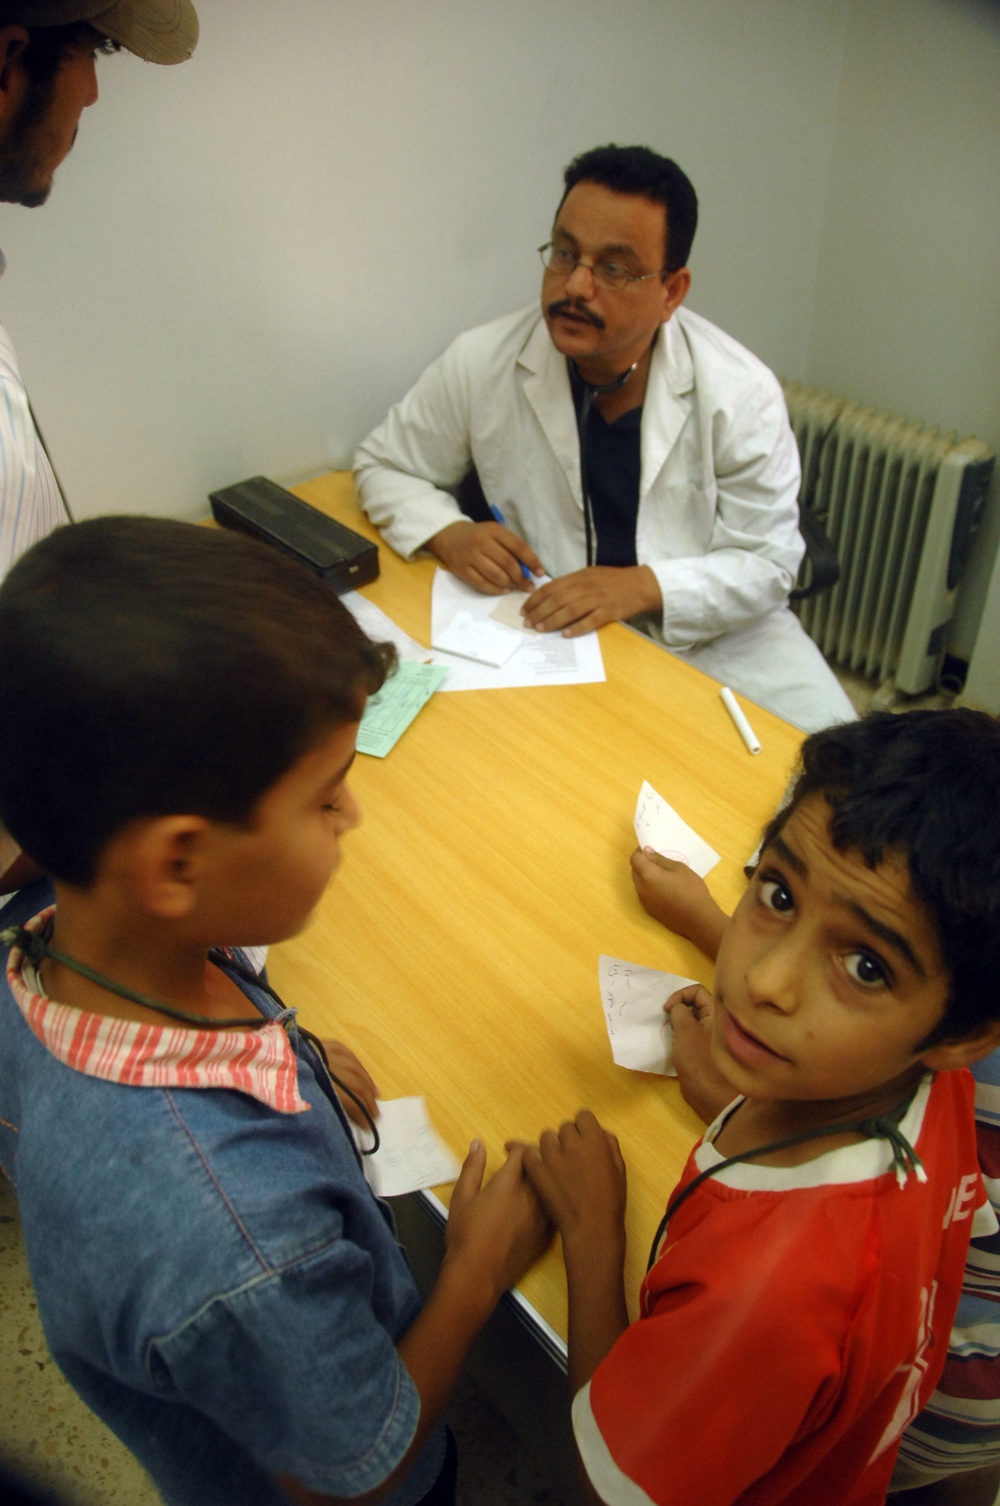 Health Clinic Opens Doors for Iraqi Citizens